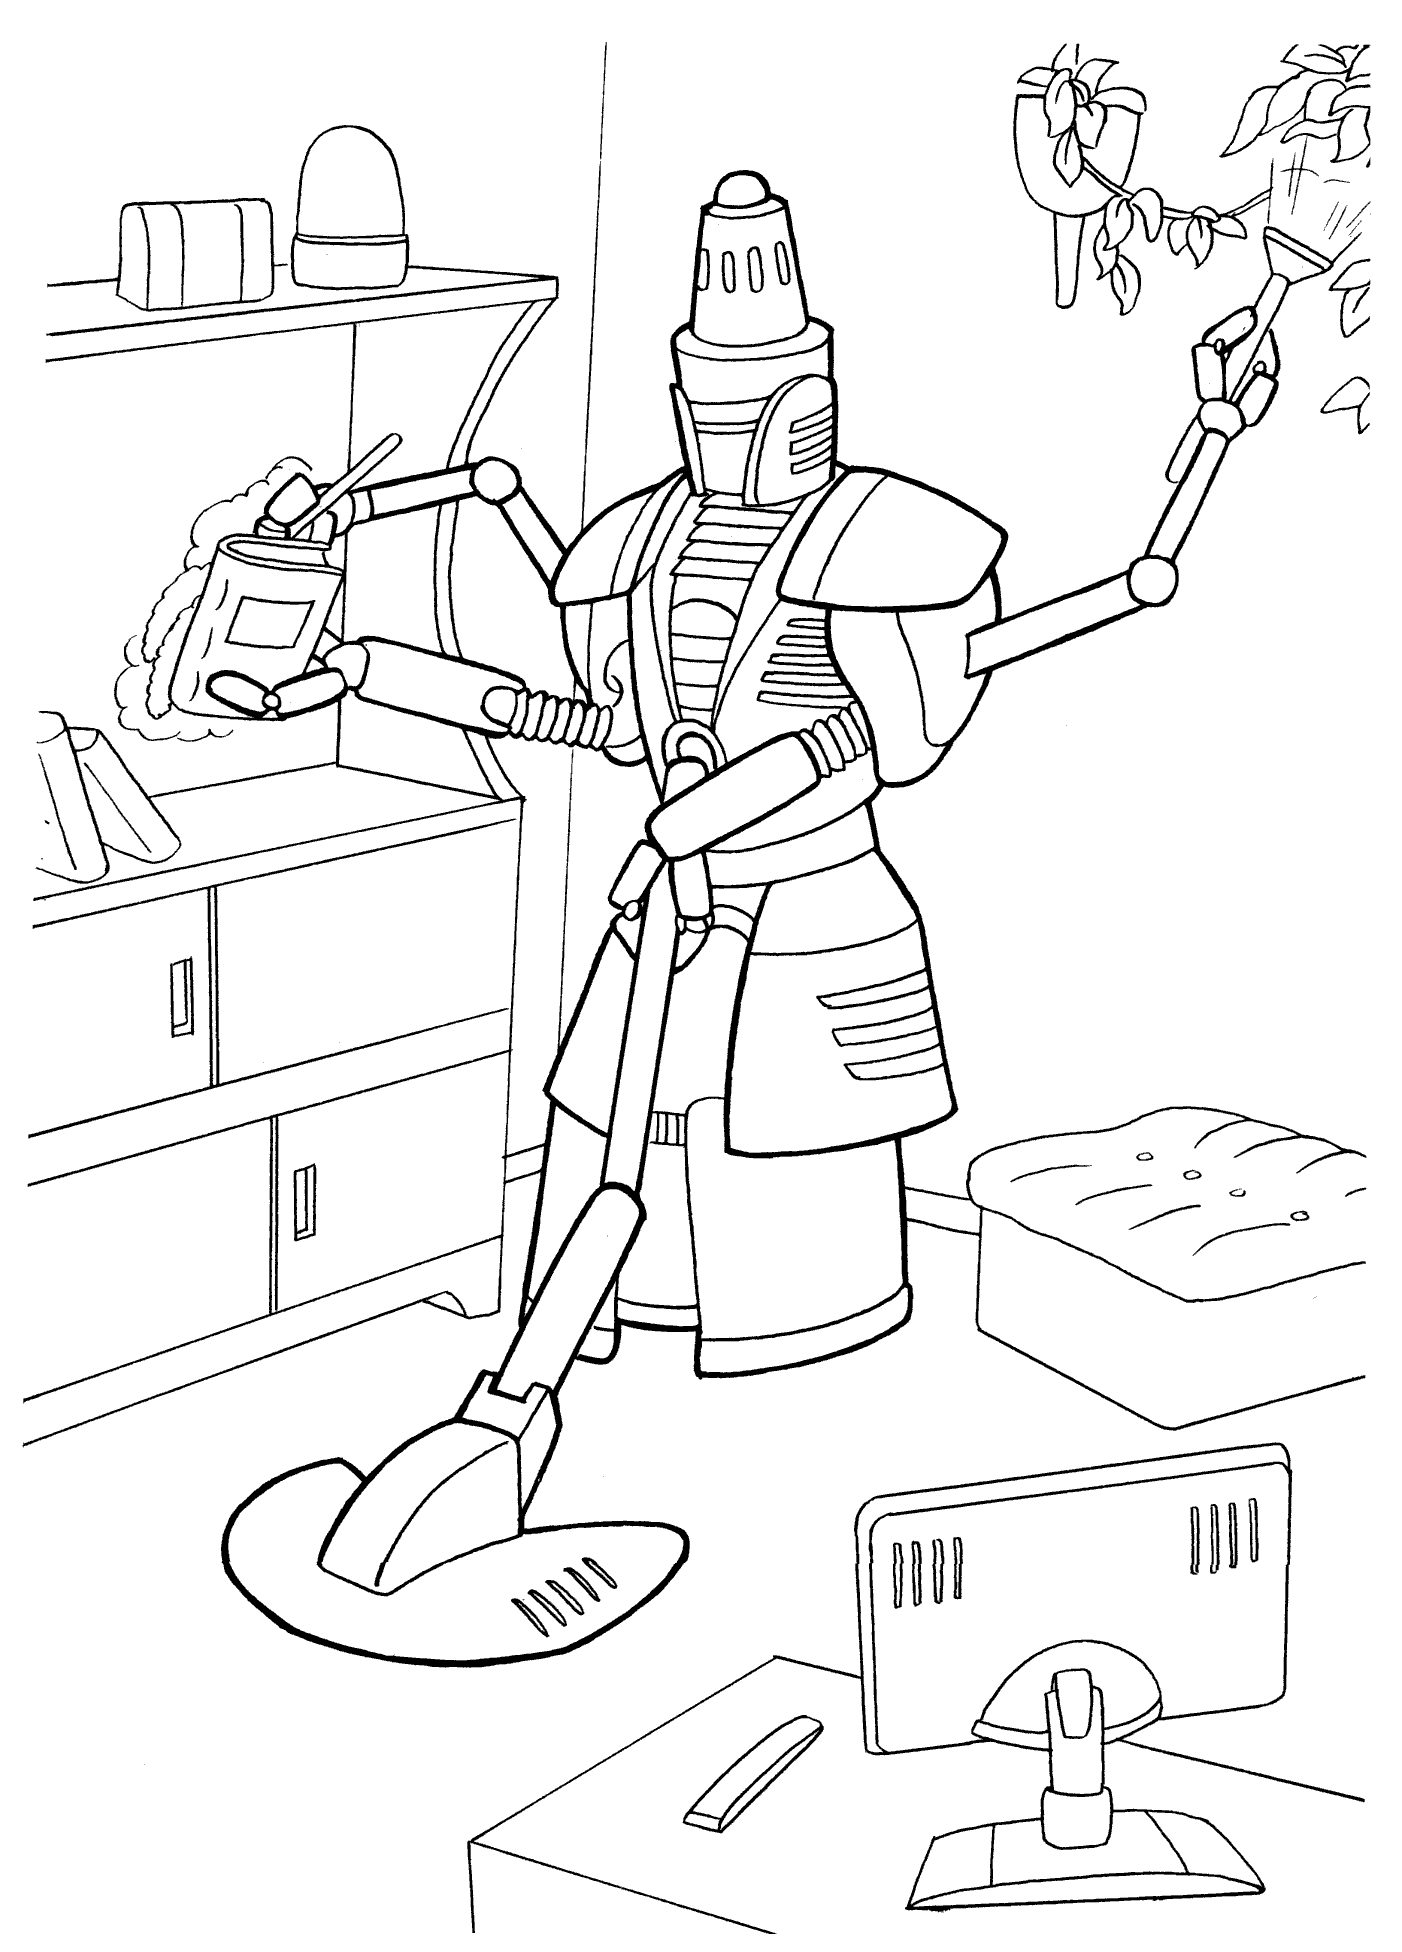 Coloring page - The cleaning robot